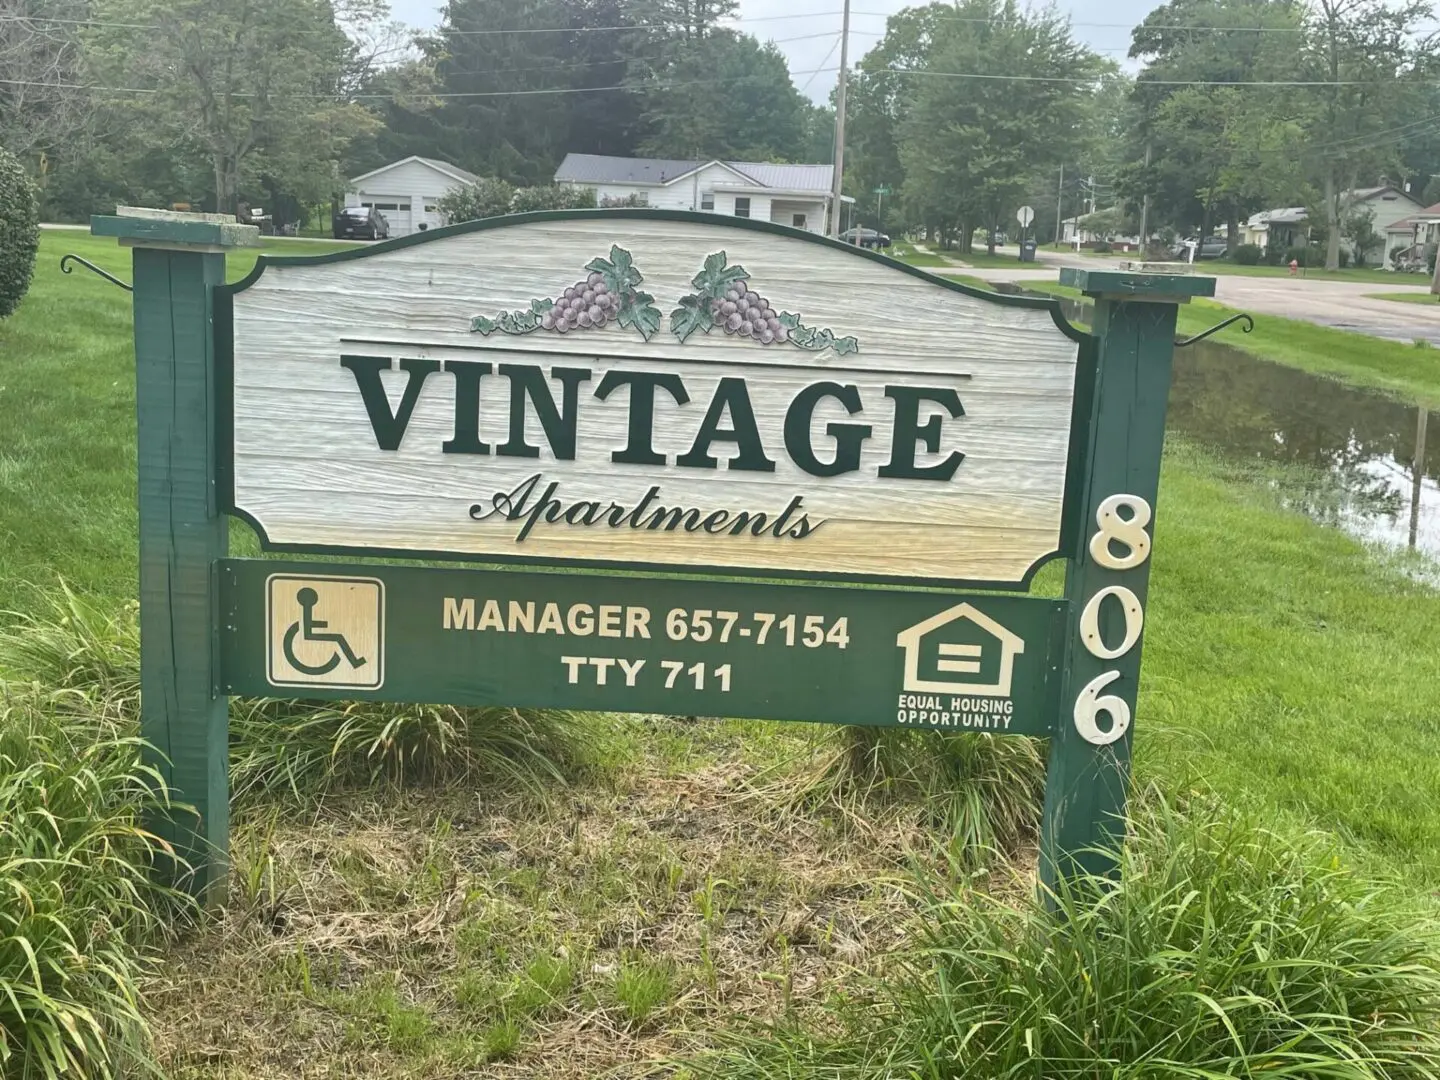 Vintage Apartments Manager 657 7154 TTY 711